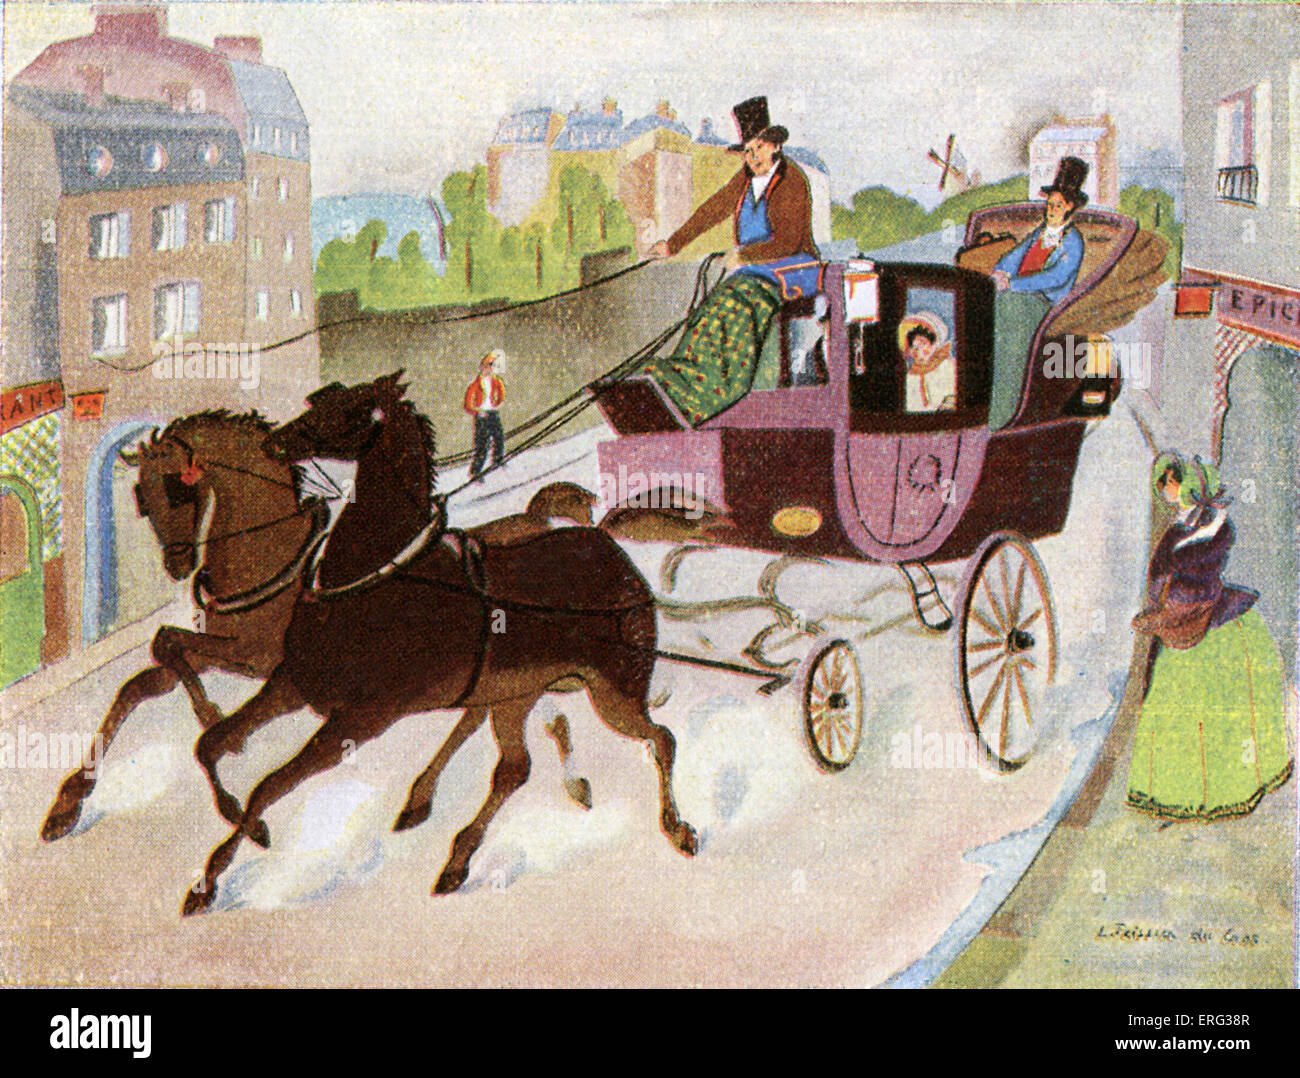 Carriage and two horses, impression of a Paris street in 1831.  Illustration from 1930 by L. Teissier du Cros. Stock Photo